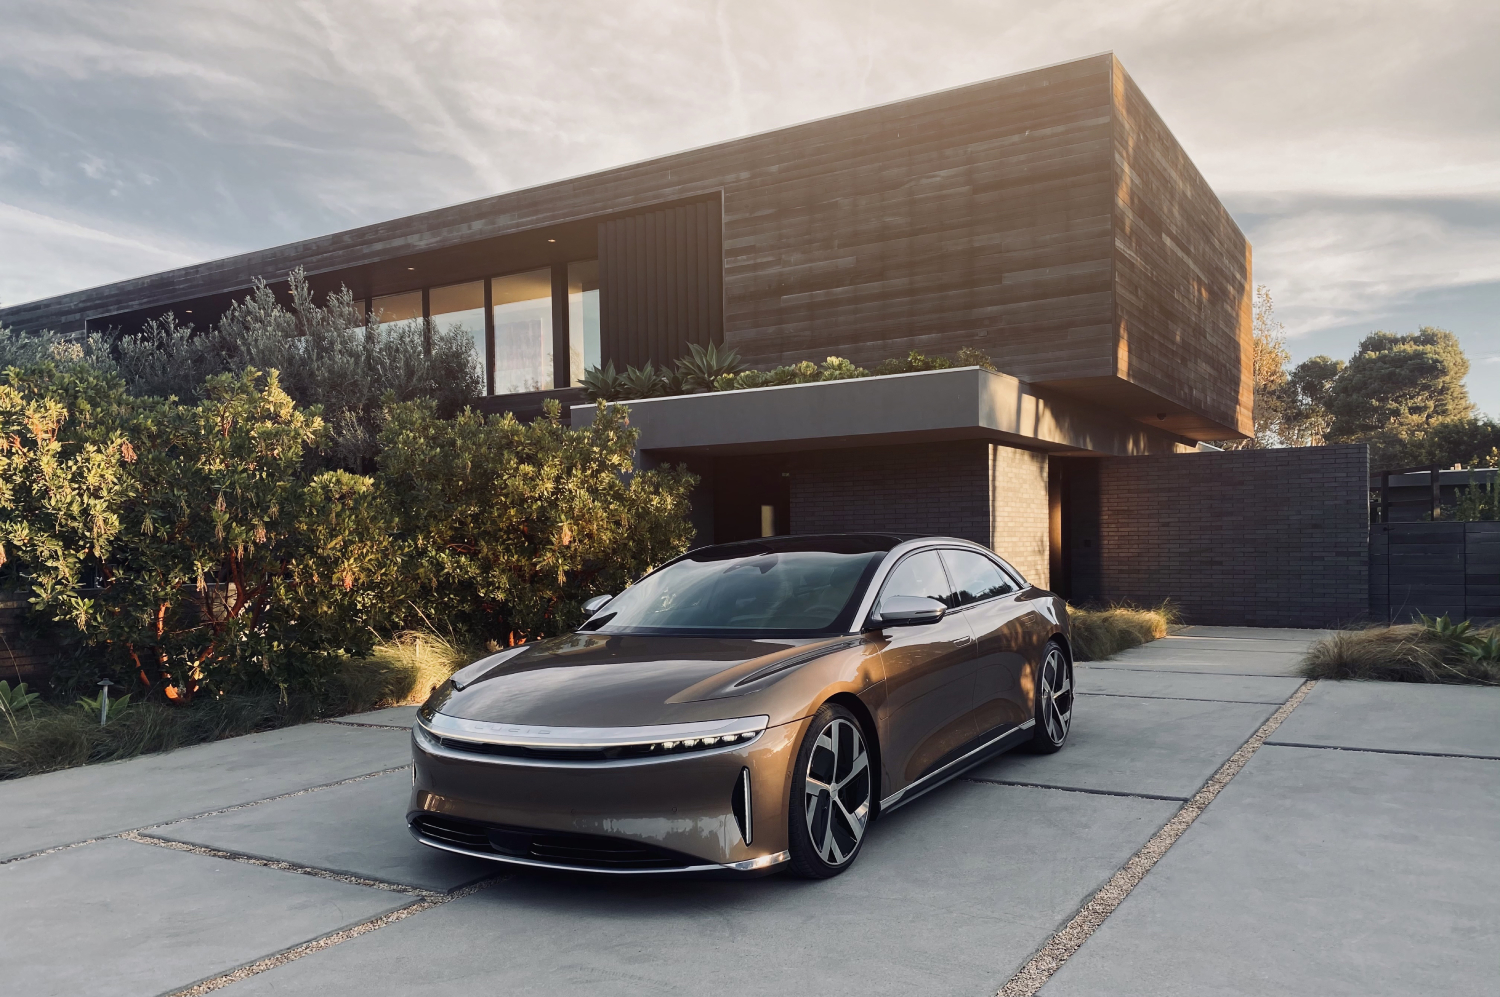 The Lucid Air was compared to the Tesla Model S and Mercedes-Benz EQS by Edmunds